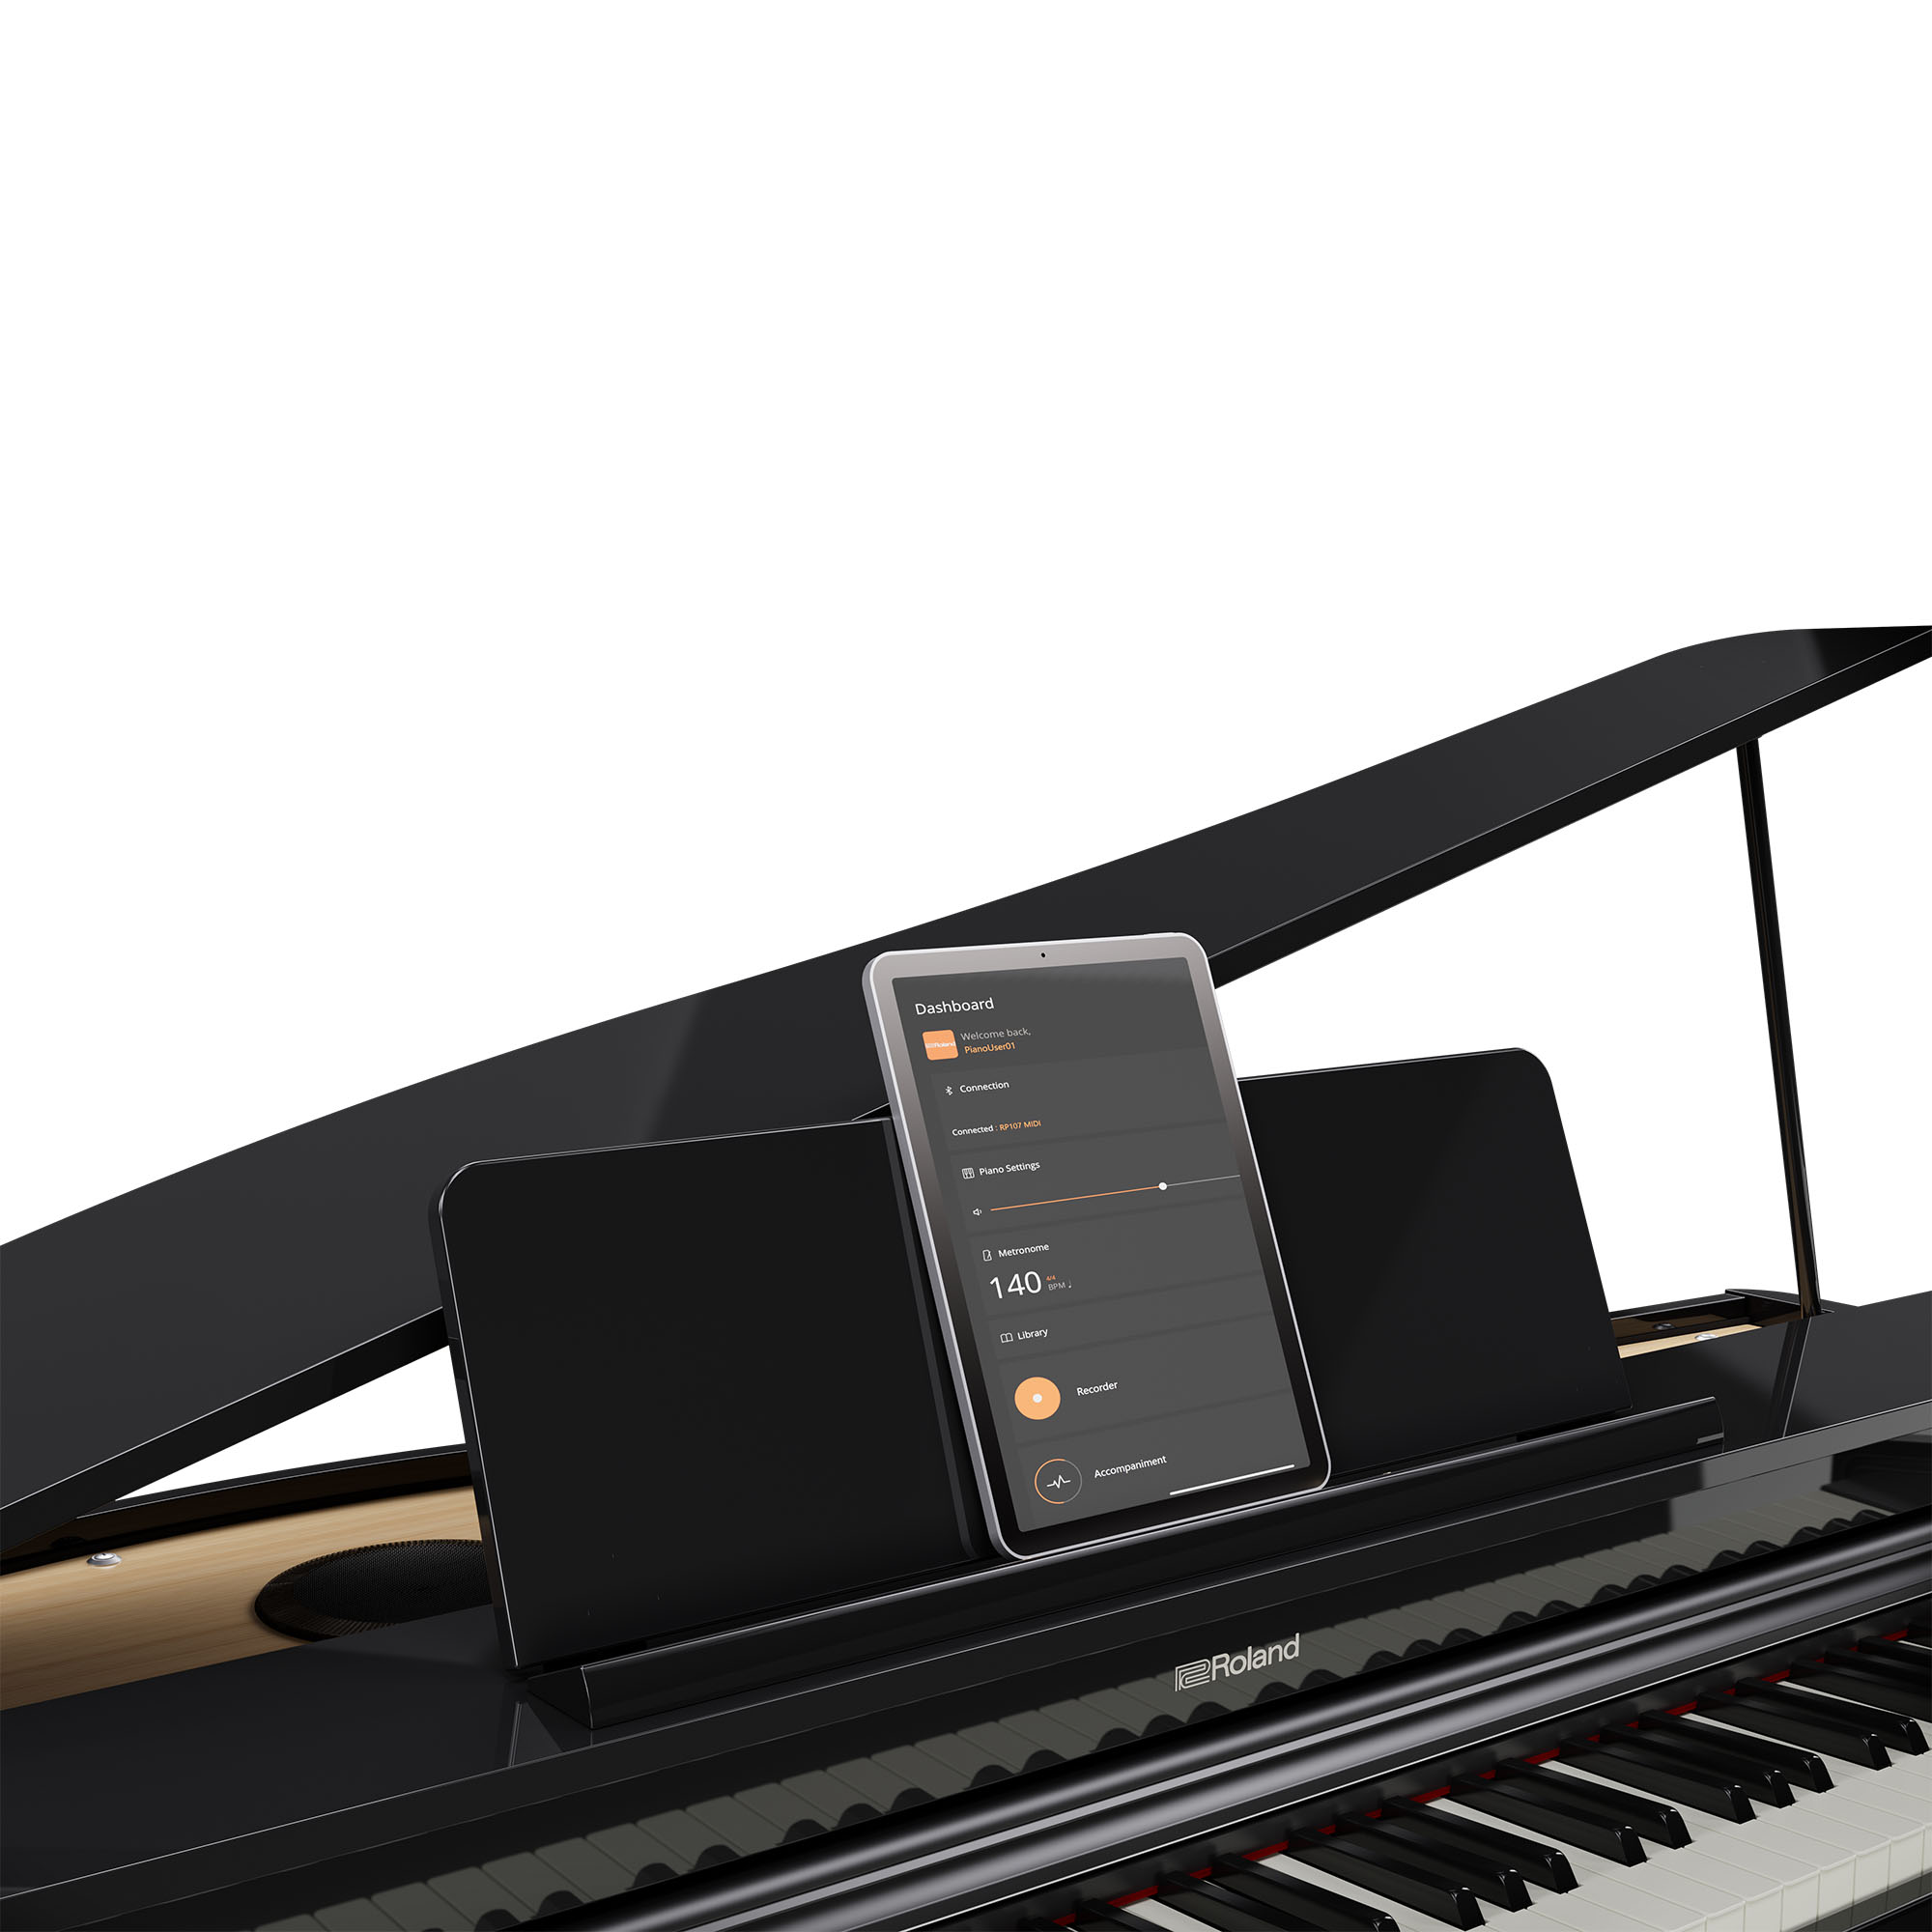 Roland Gp-3 - Digital piano with stand - Variation 6